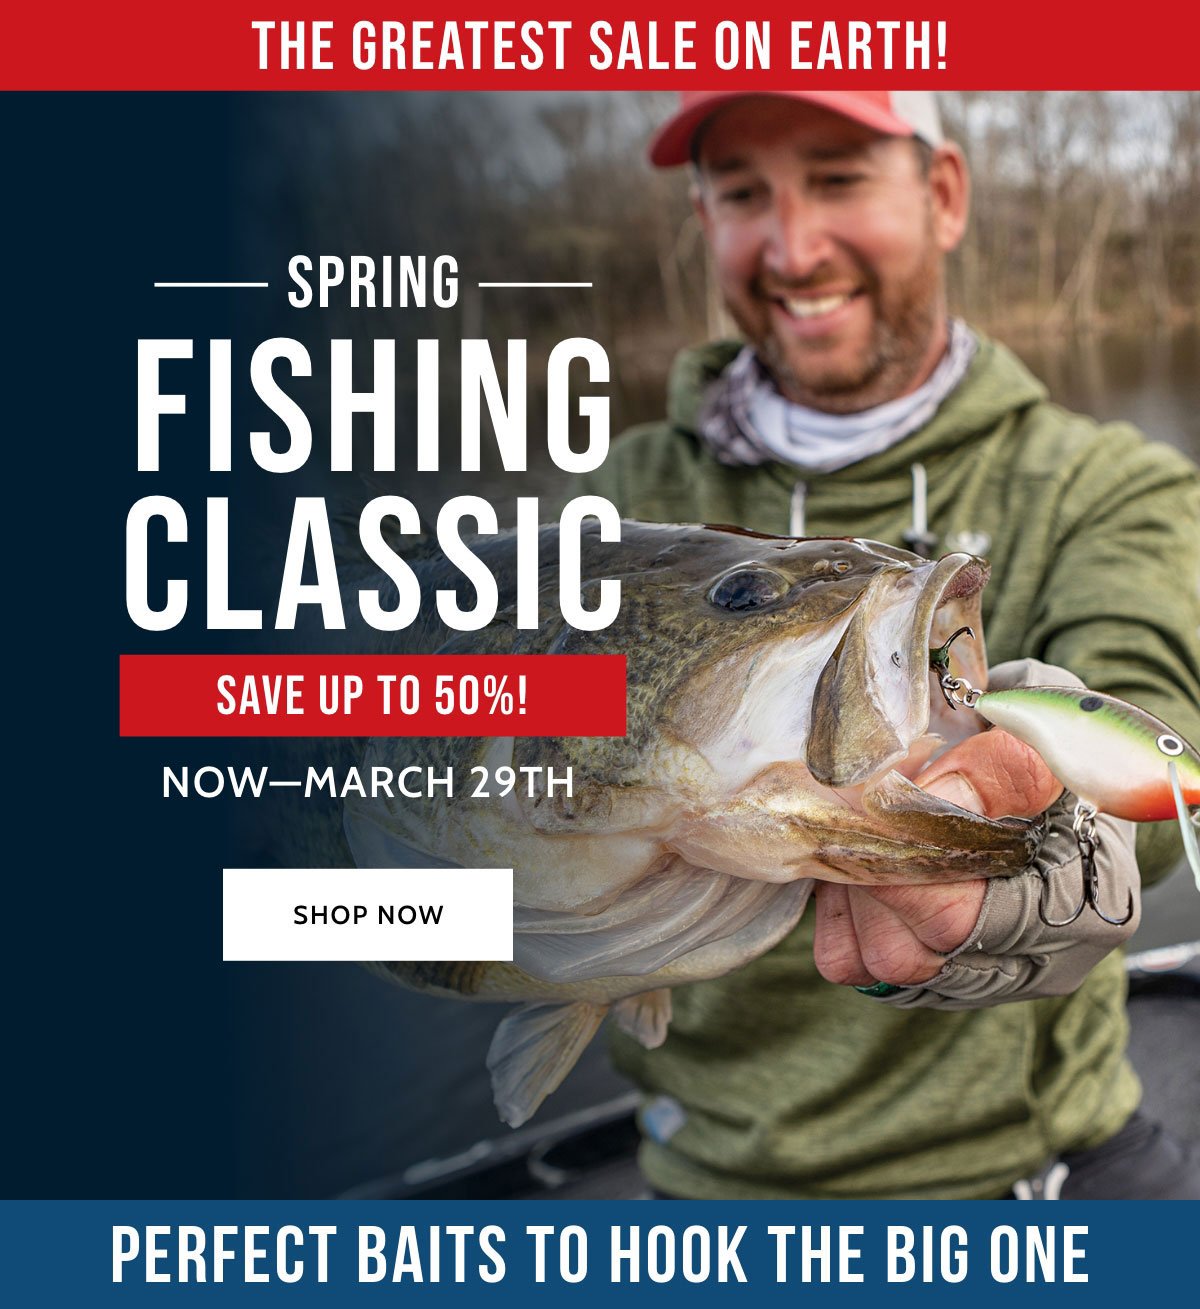 Bass Pro Shops: Our Biggest Fishing Sale Of The Year Is Going On Now!